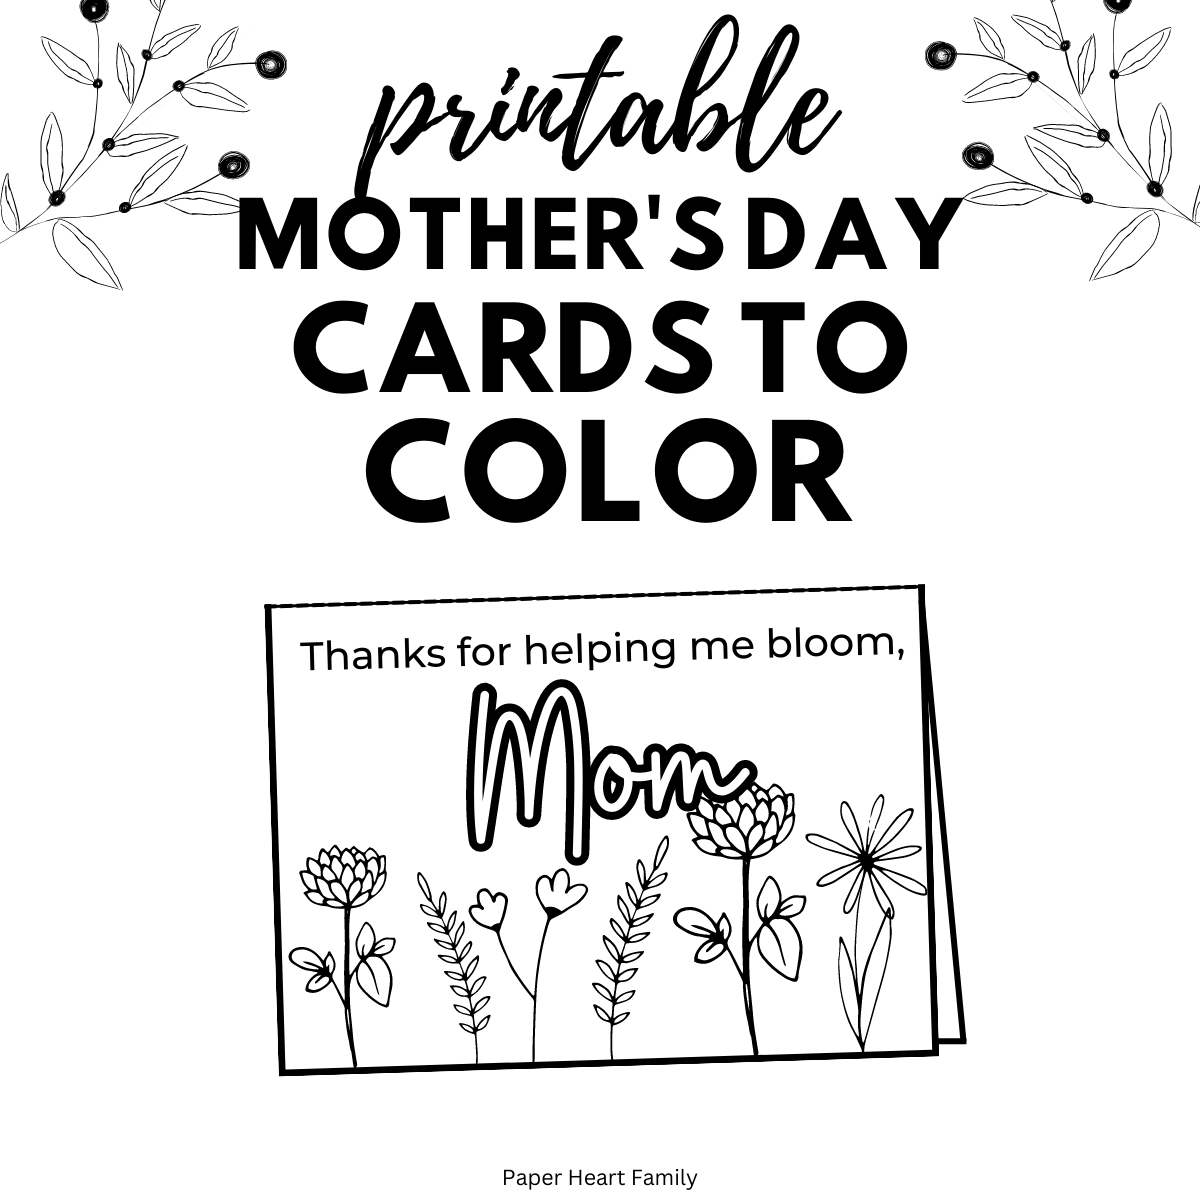 Mother's Day cards to color